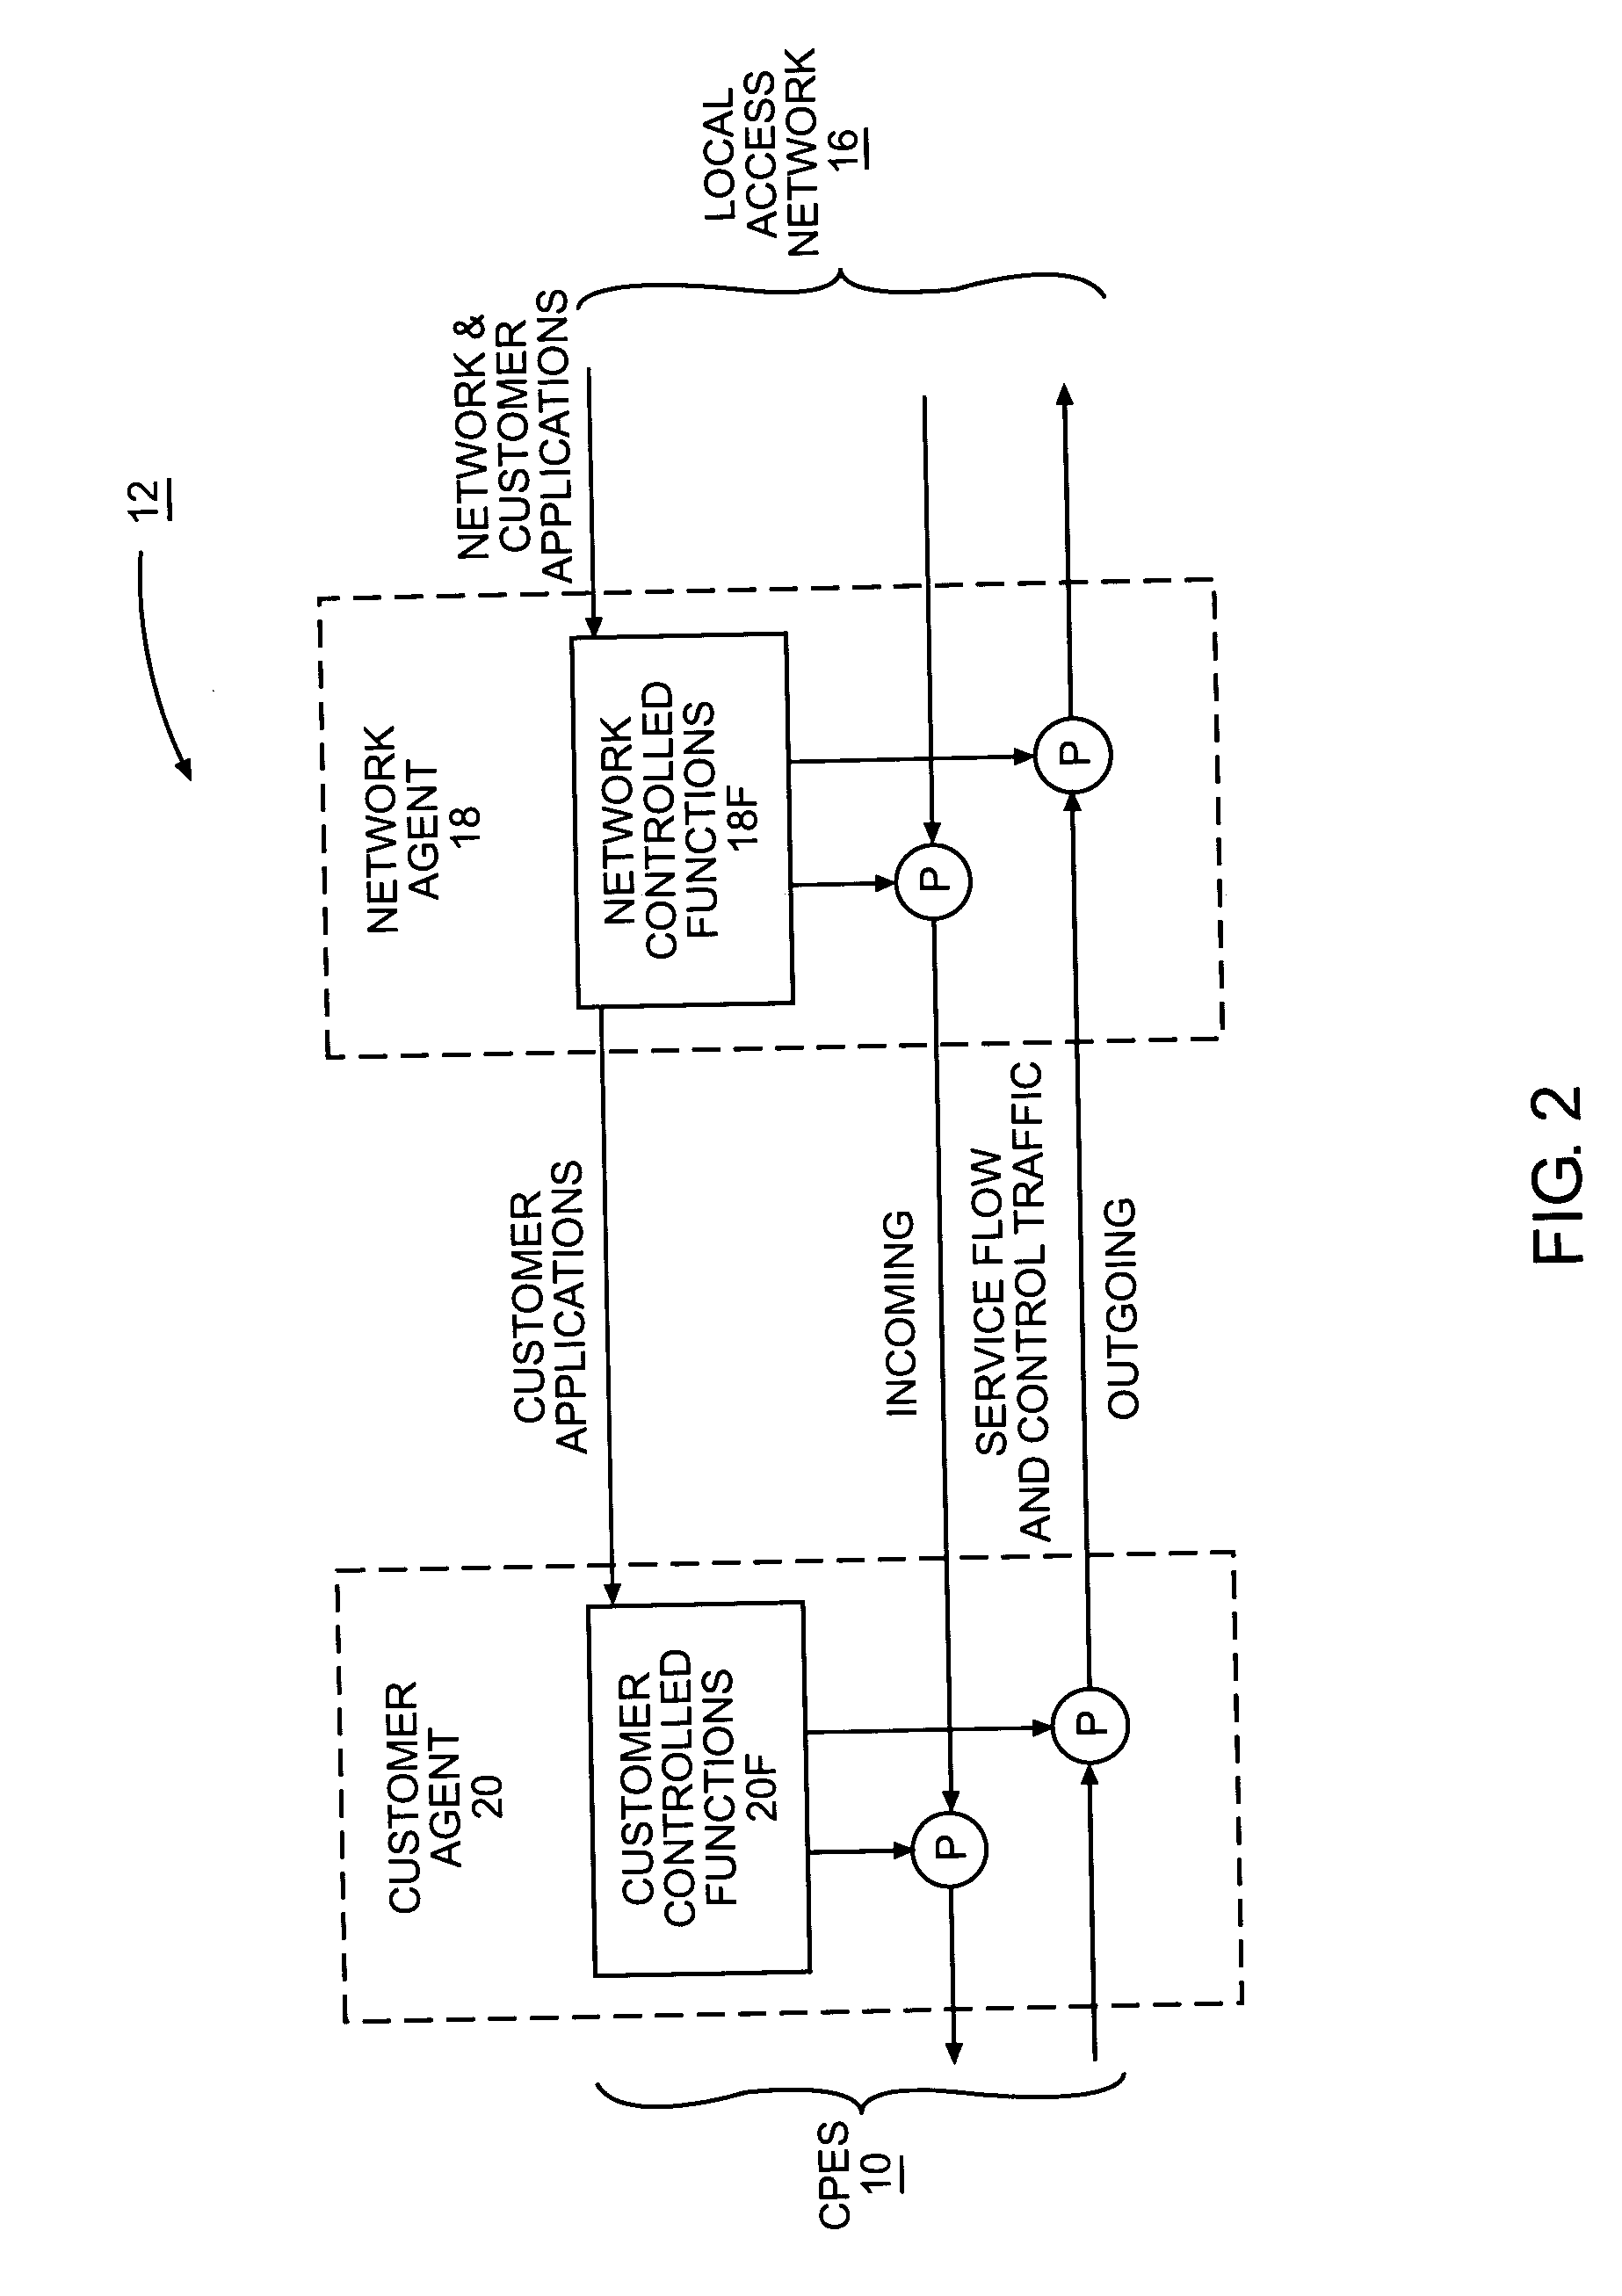 Network controlled customer service gateway for facilitating multimedia services over a common network